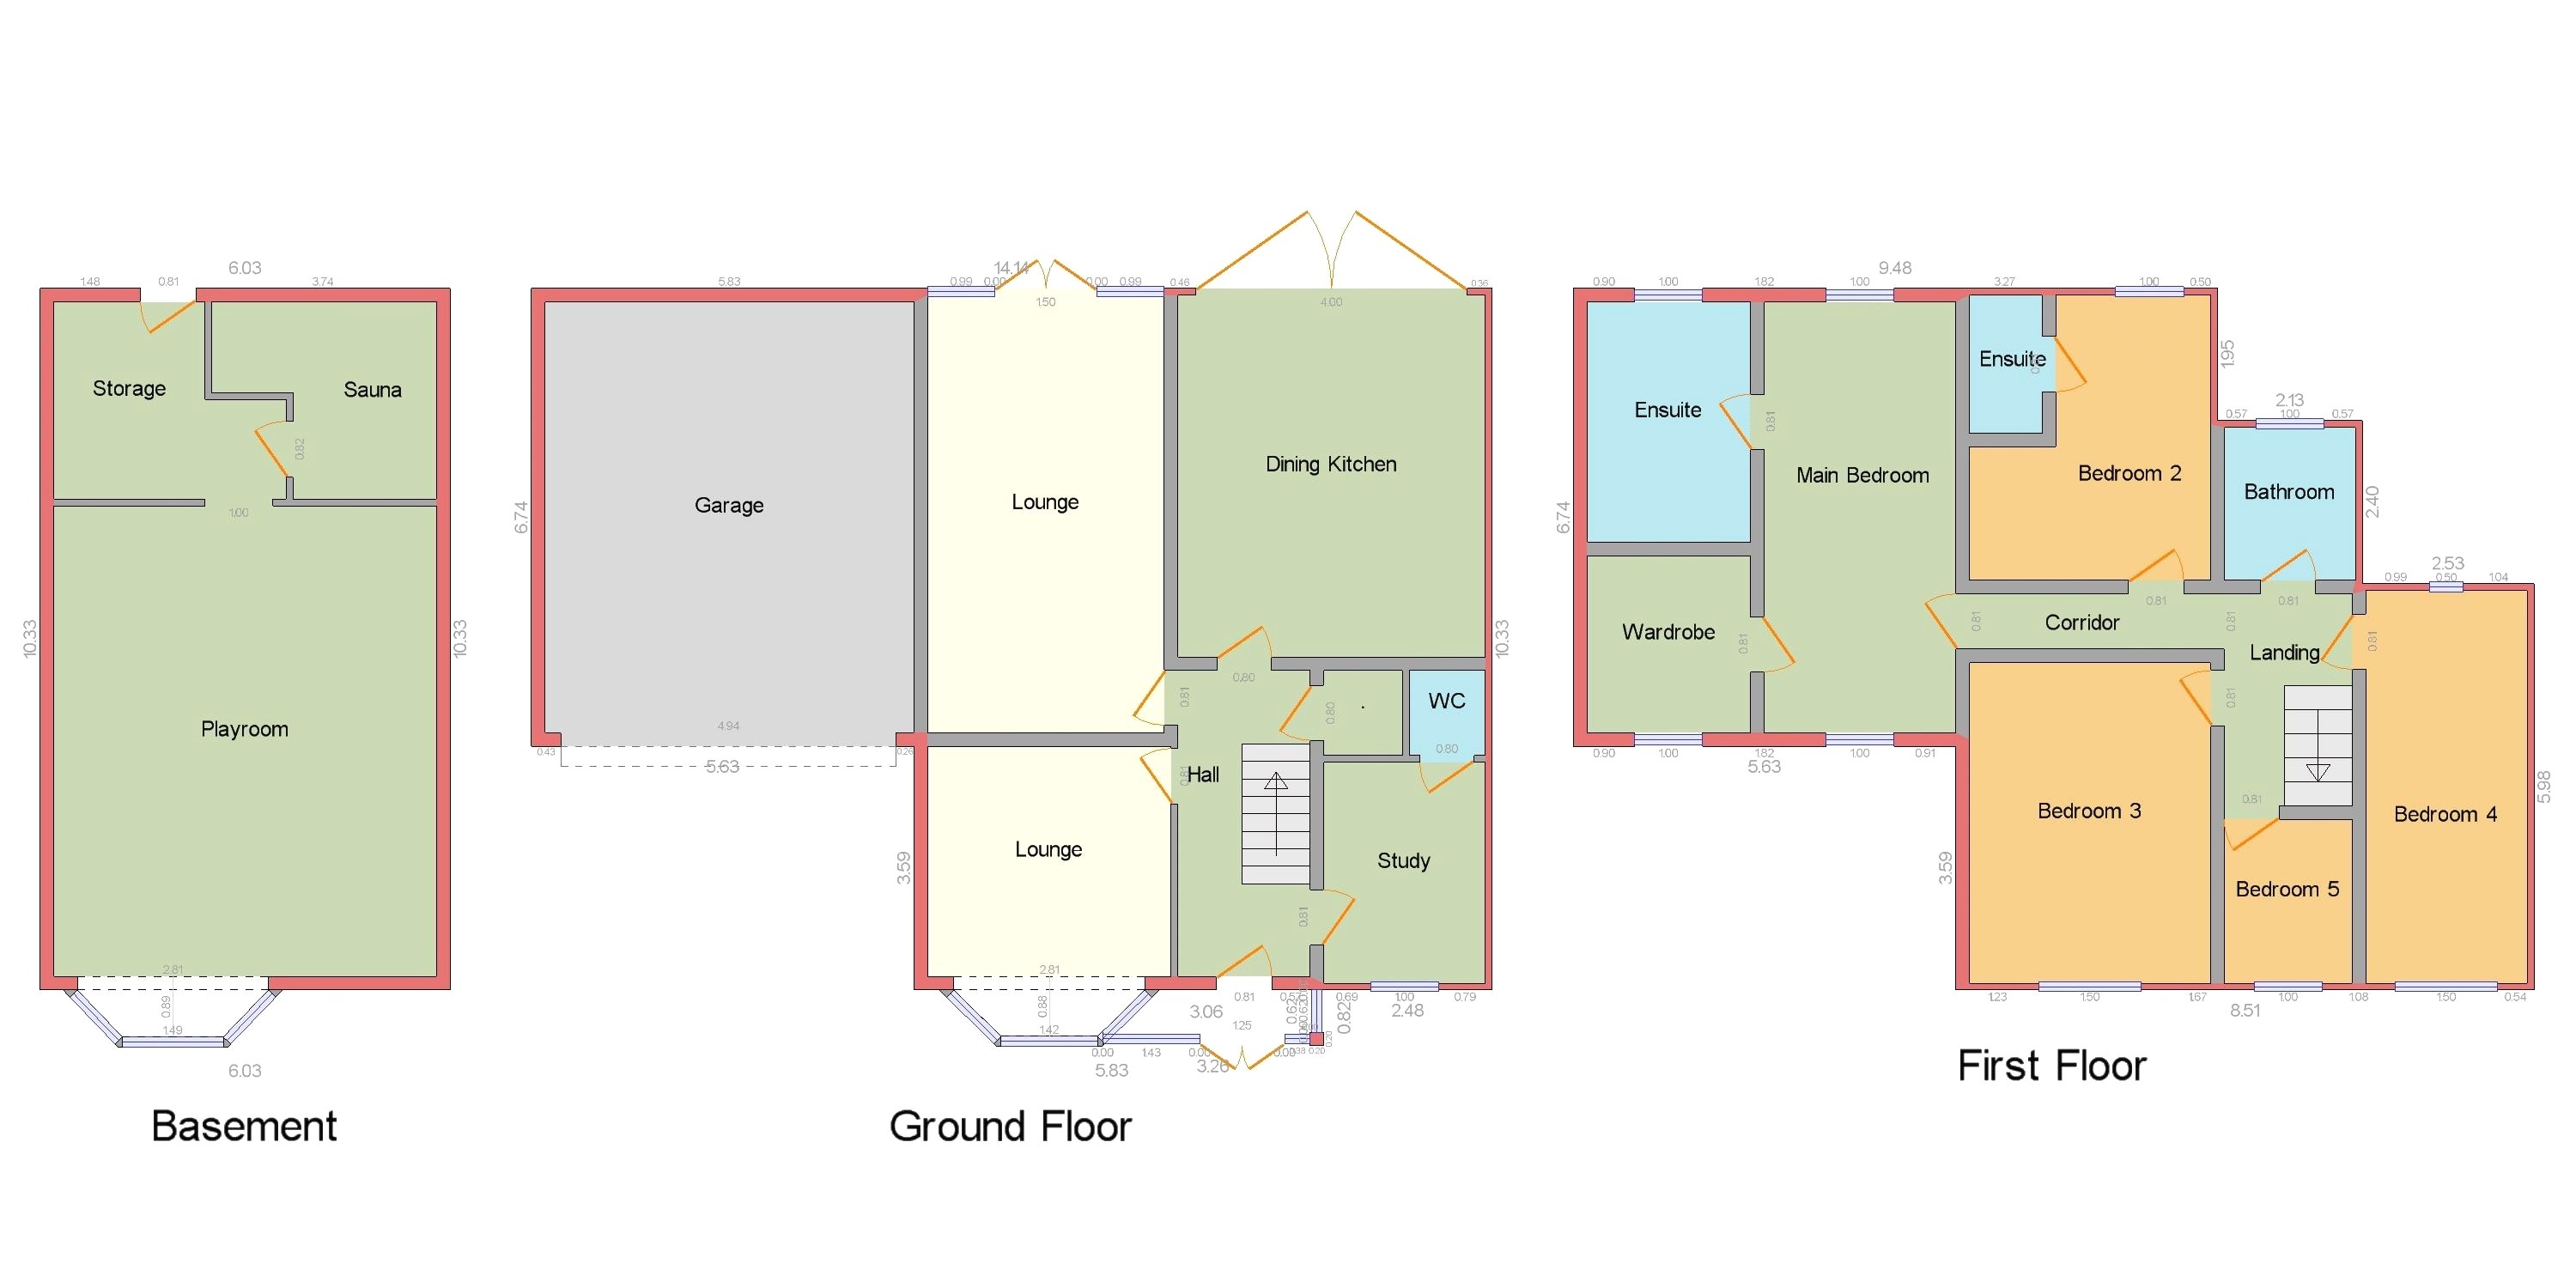 mcconnell afb housing floor plans